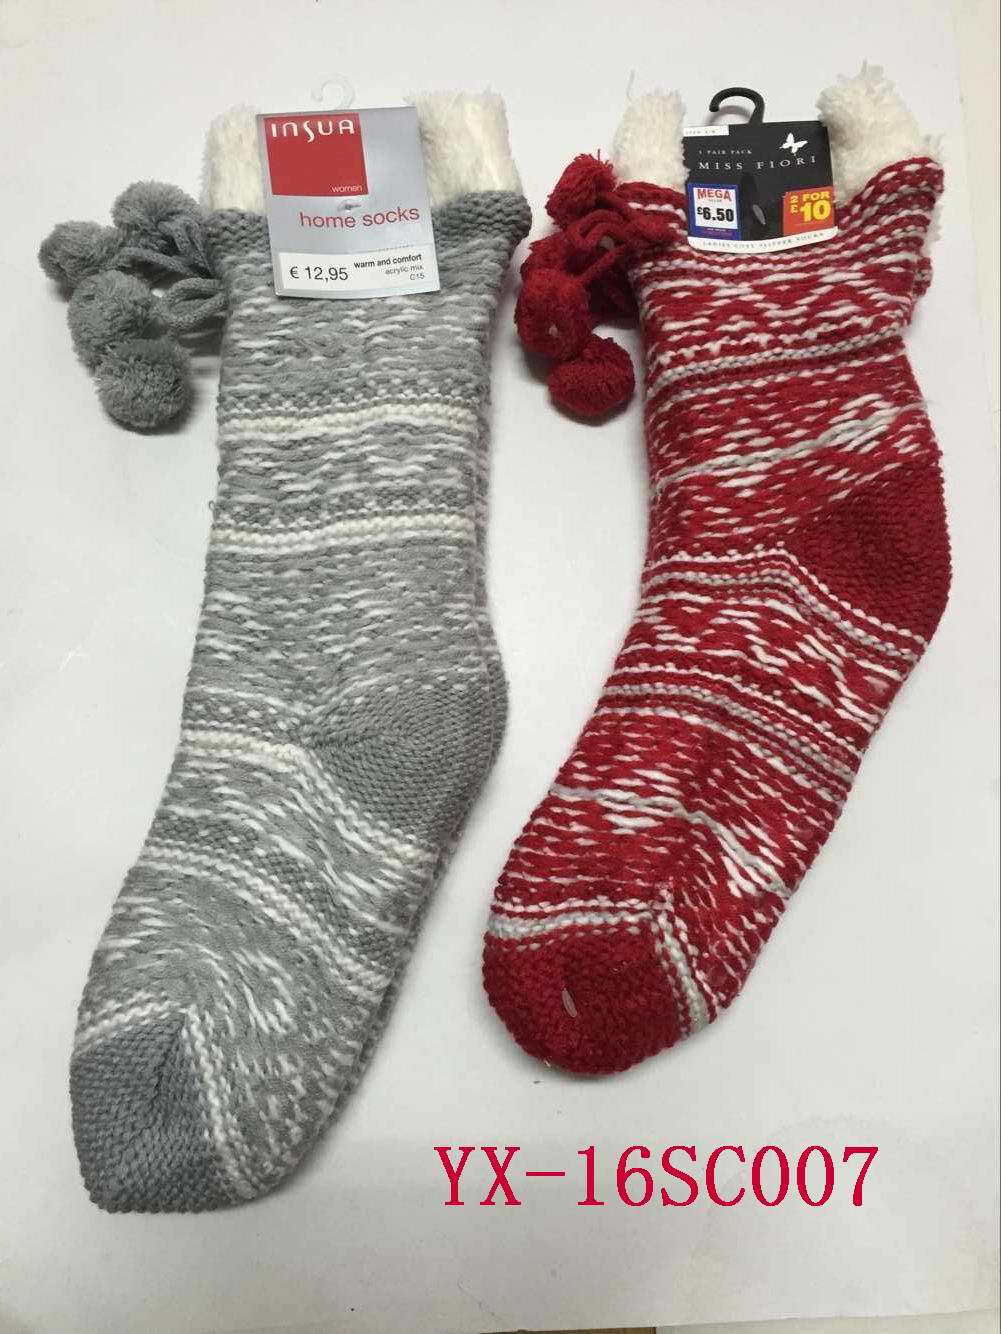 <img src='../manage/Upload/Pic/2016125141822279.jpg' width='400' style='border:3px solid #EEEEEE;'><div align=center>Name:HOME SOCKS,No.:6010396,Price:0 元</div>